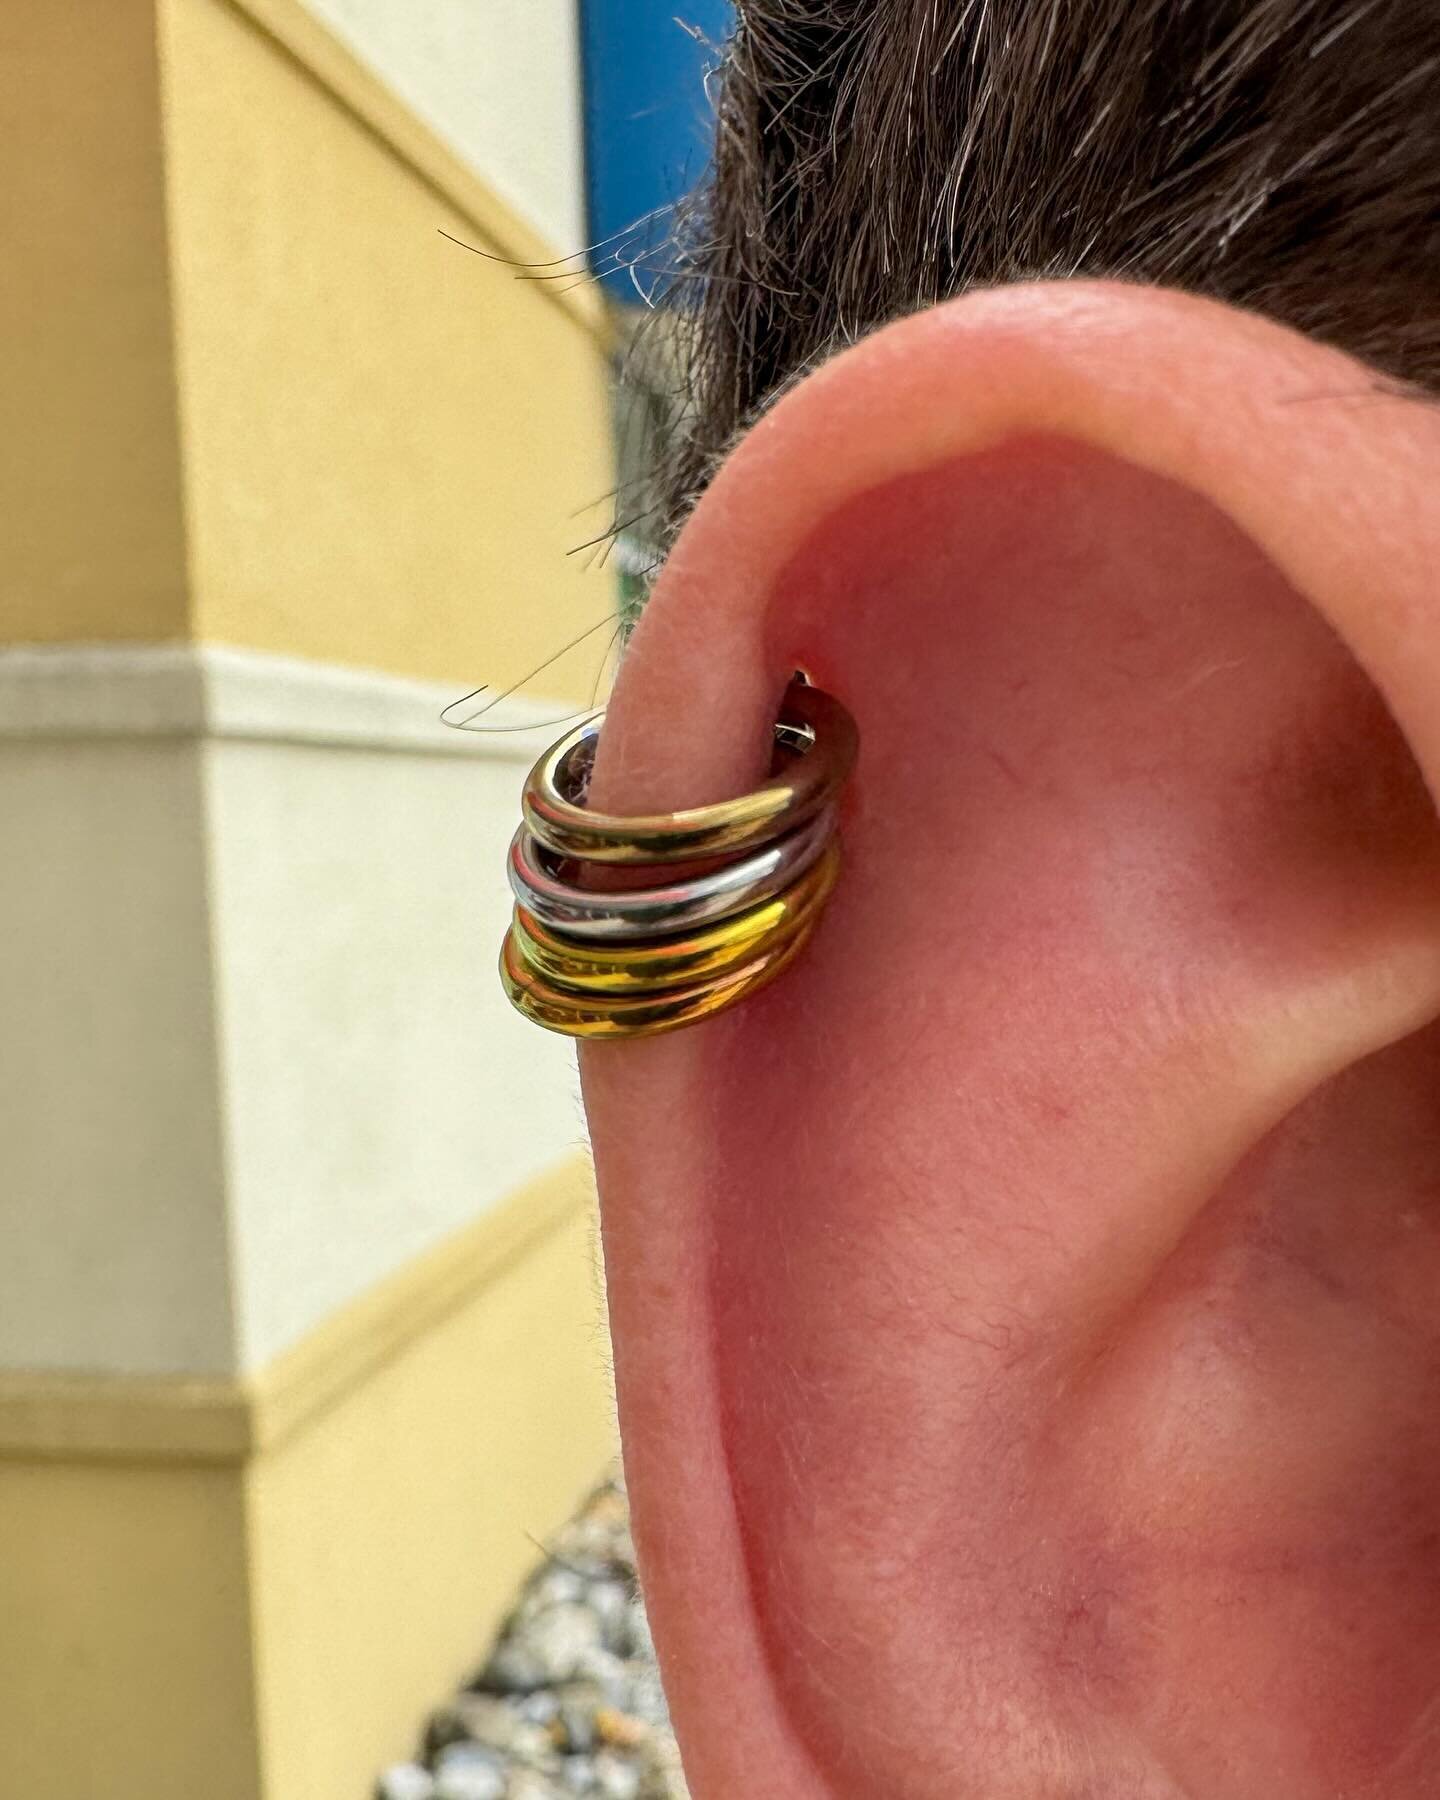 I seriously cannot believe how fast my slots are healing. @johnrossswitz did an AMAZING job on them. Thanks so much dude!!!

I threw some anodized titanium rings in there for the time being but it&rsquo;ll be dripping with some gold soon. 🙃